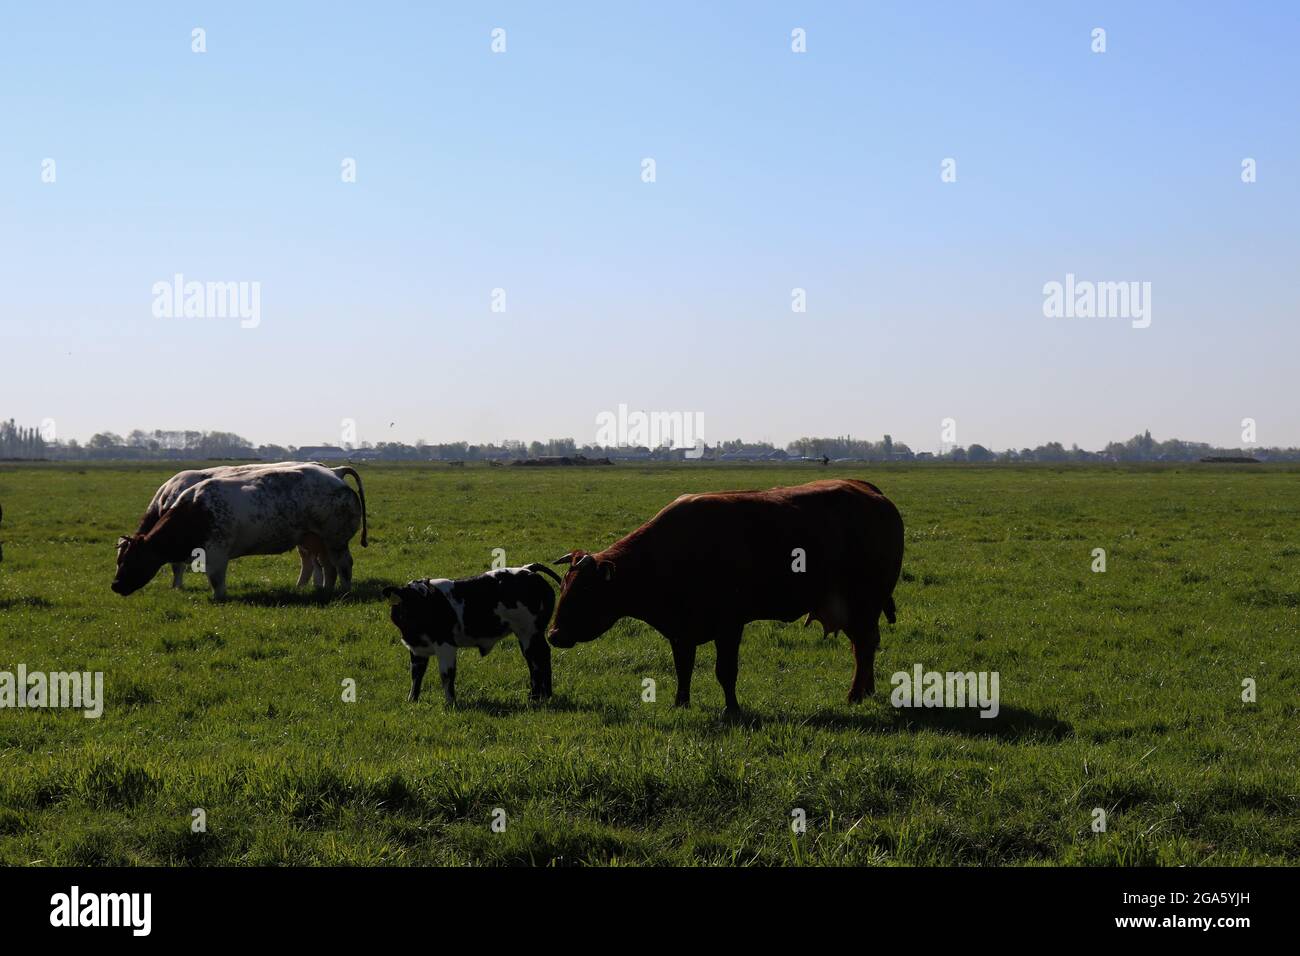 Cows in a field. Animals eating grass on a green field. Stock Photo